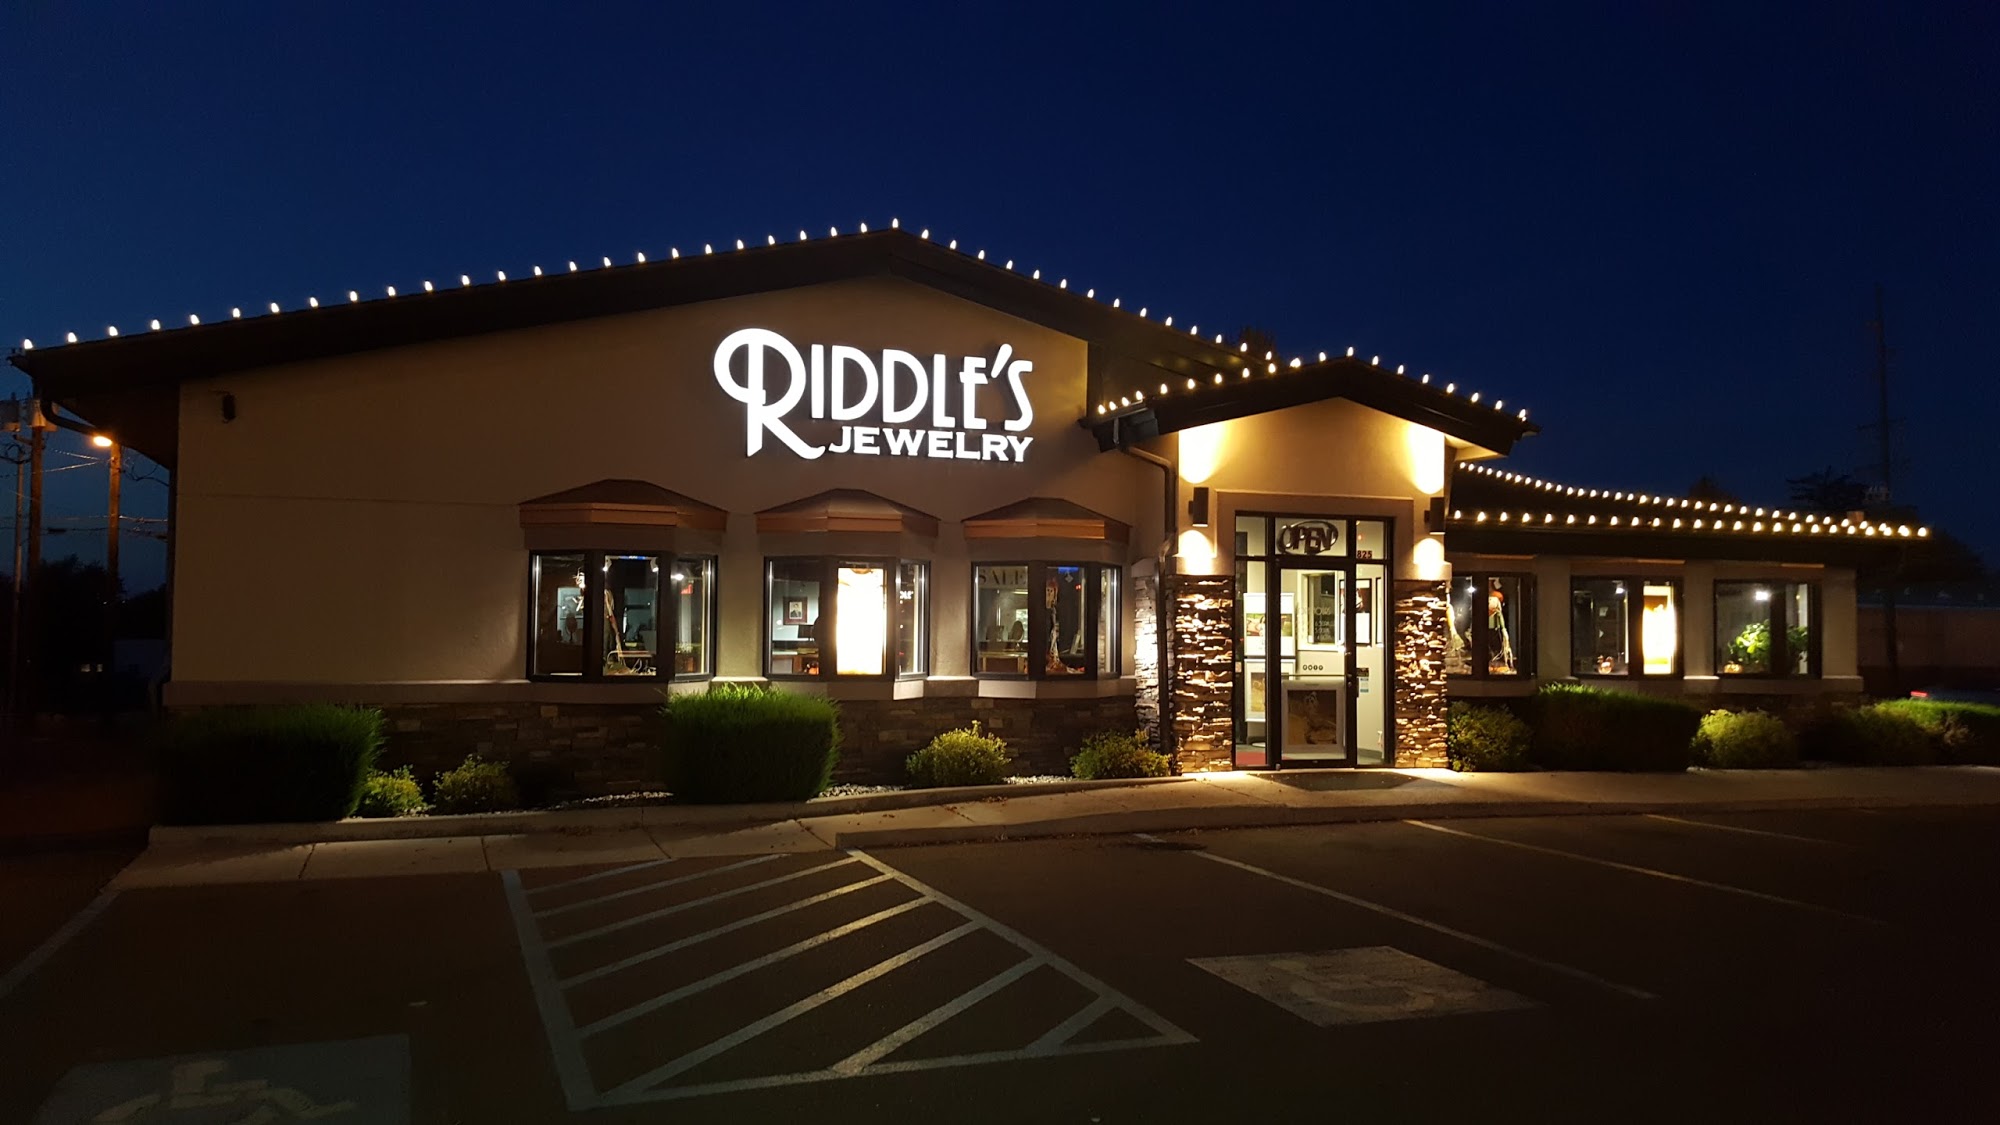 Riddle's Jewelry - Great Falls